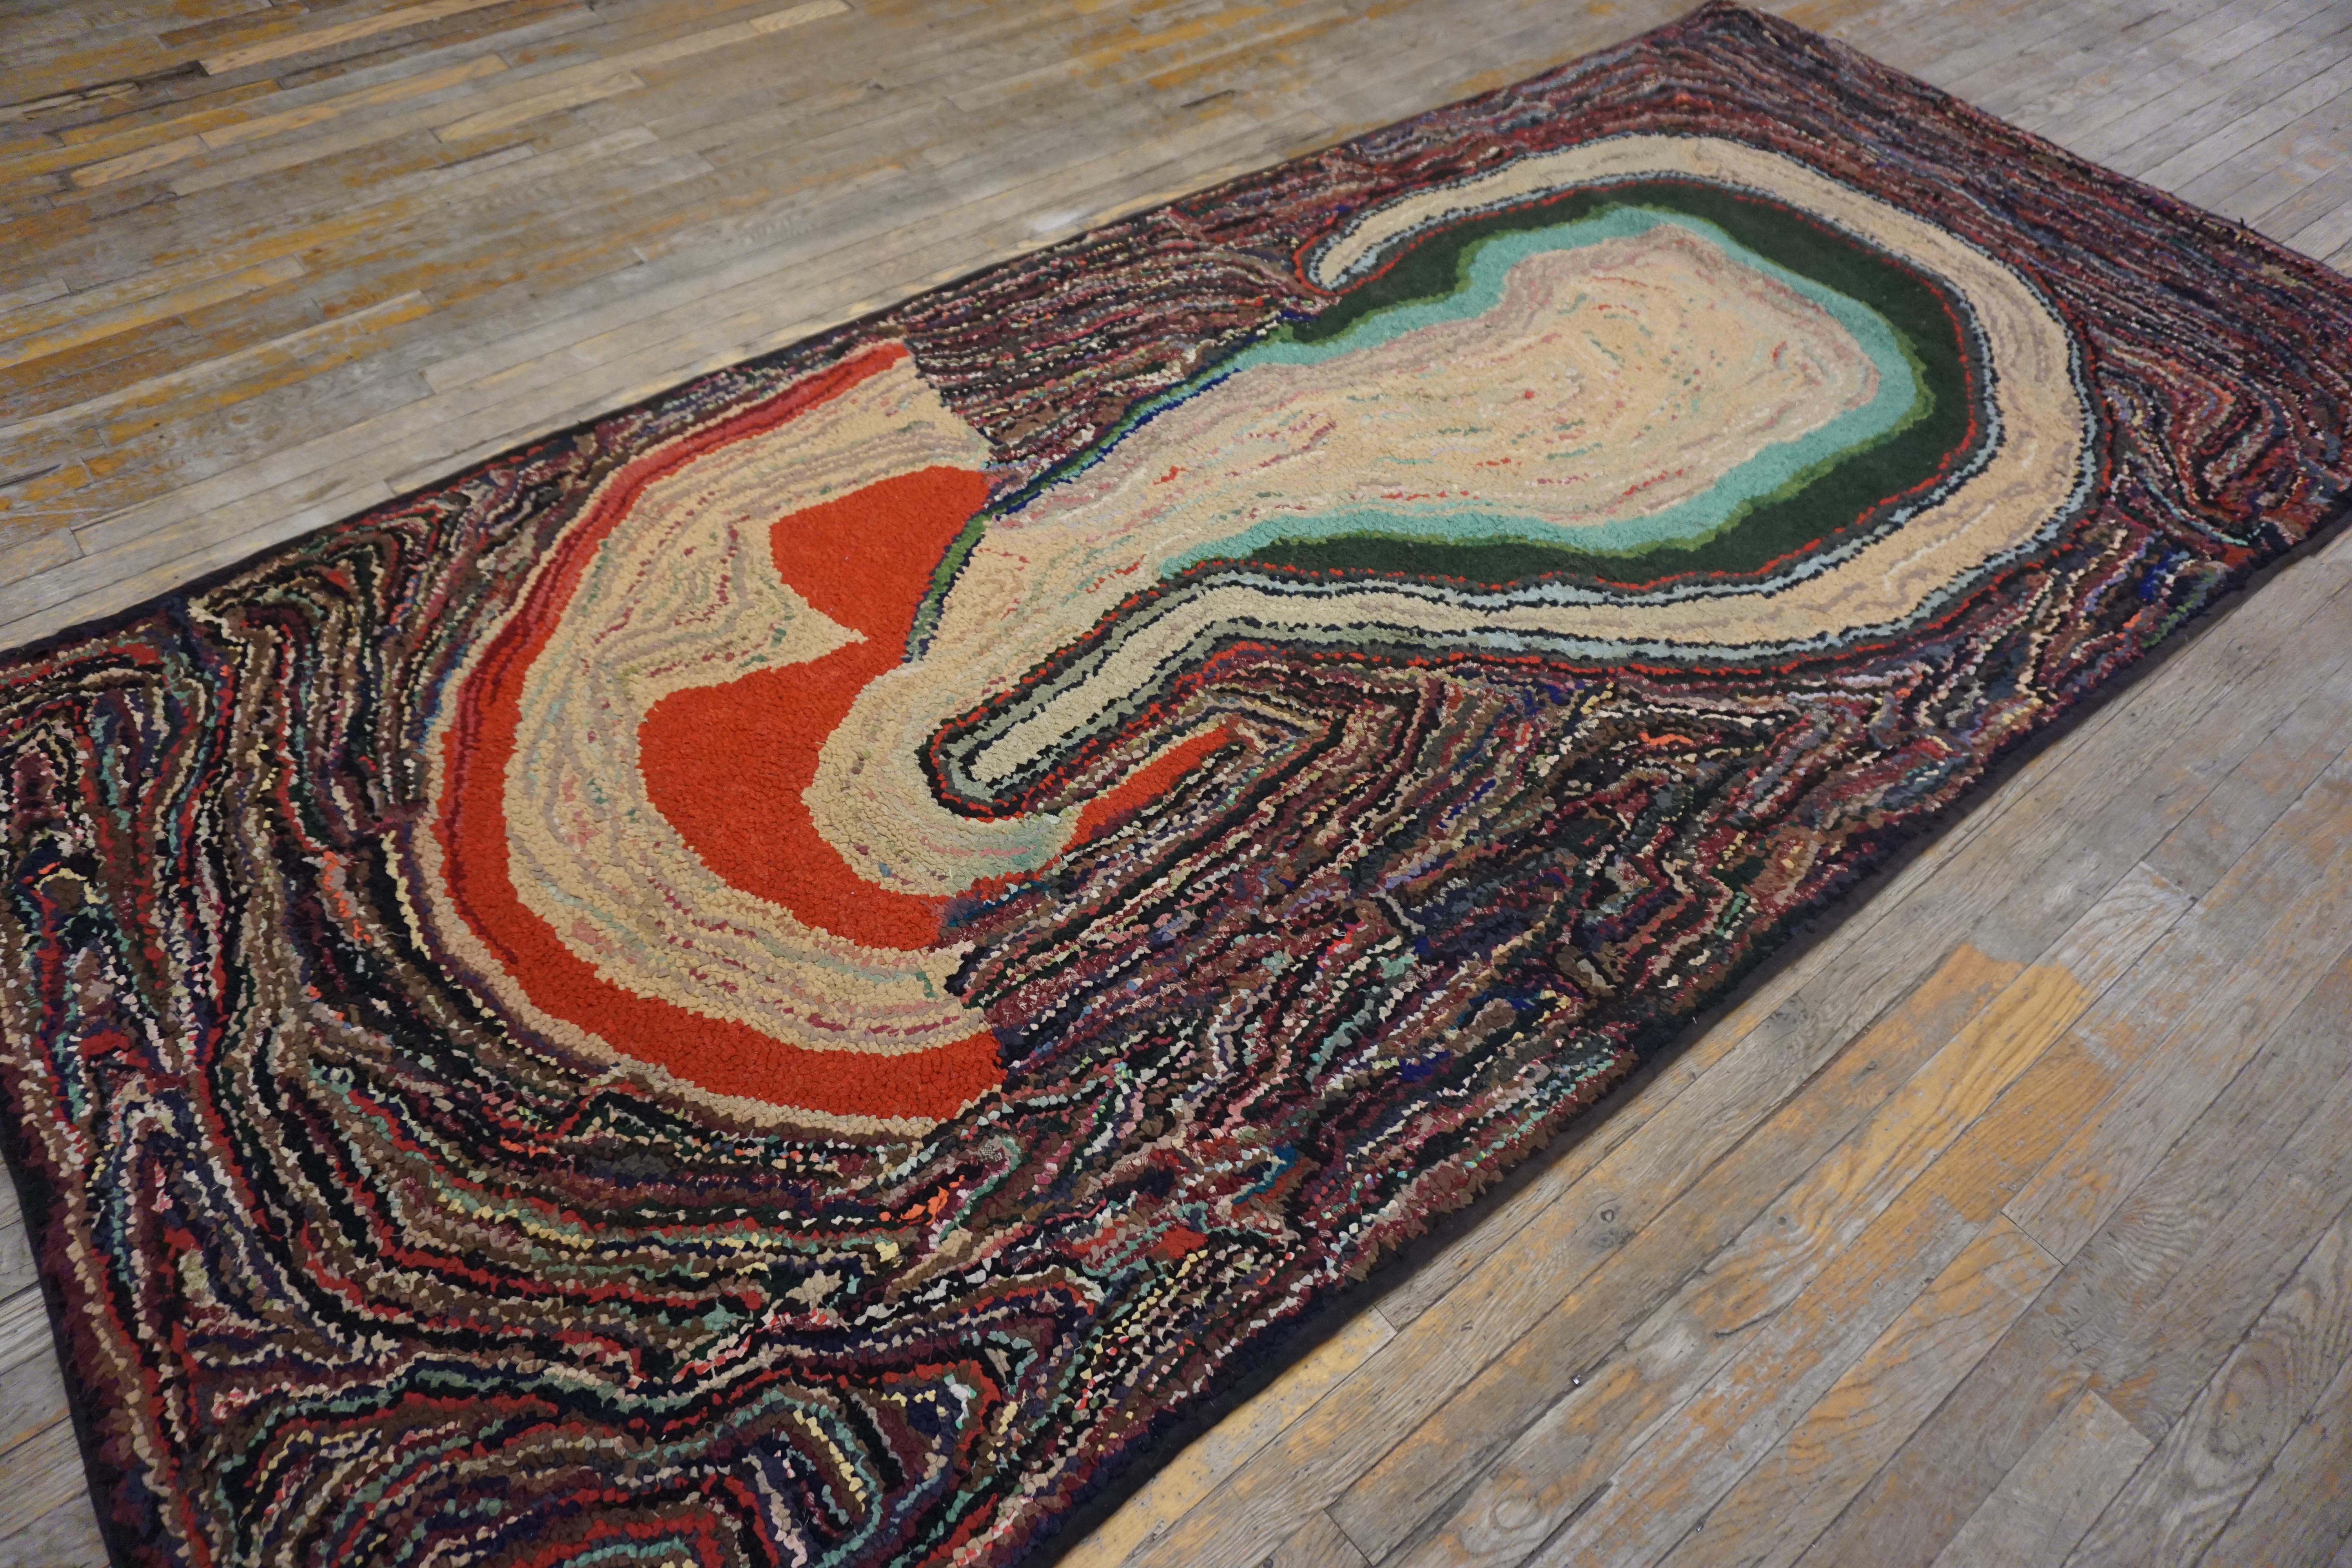 Hand-Woven Mid 20th Century American Hooked Rug ( 4'6